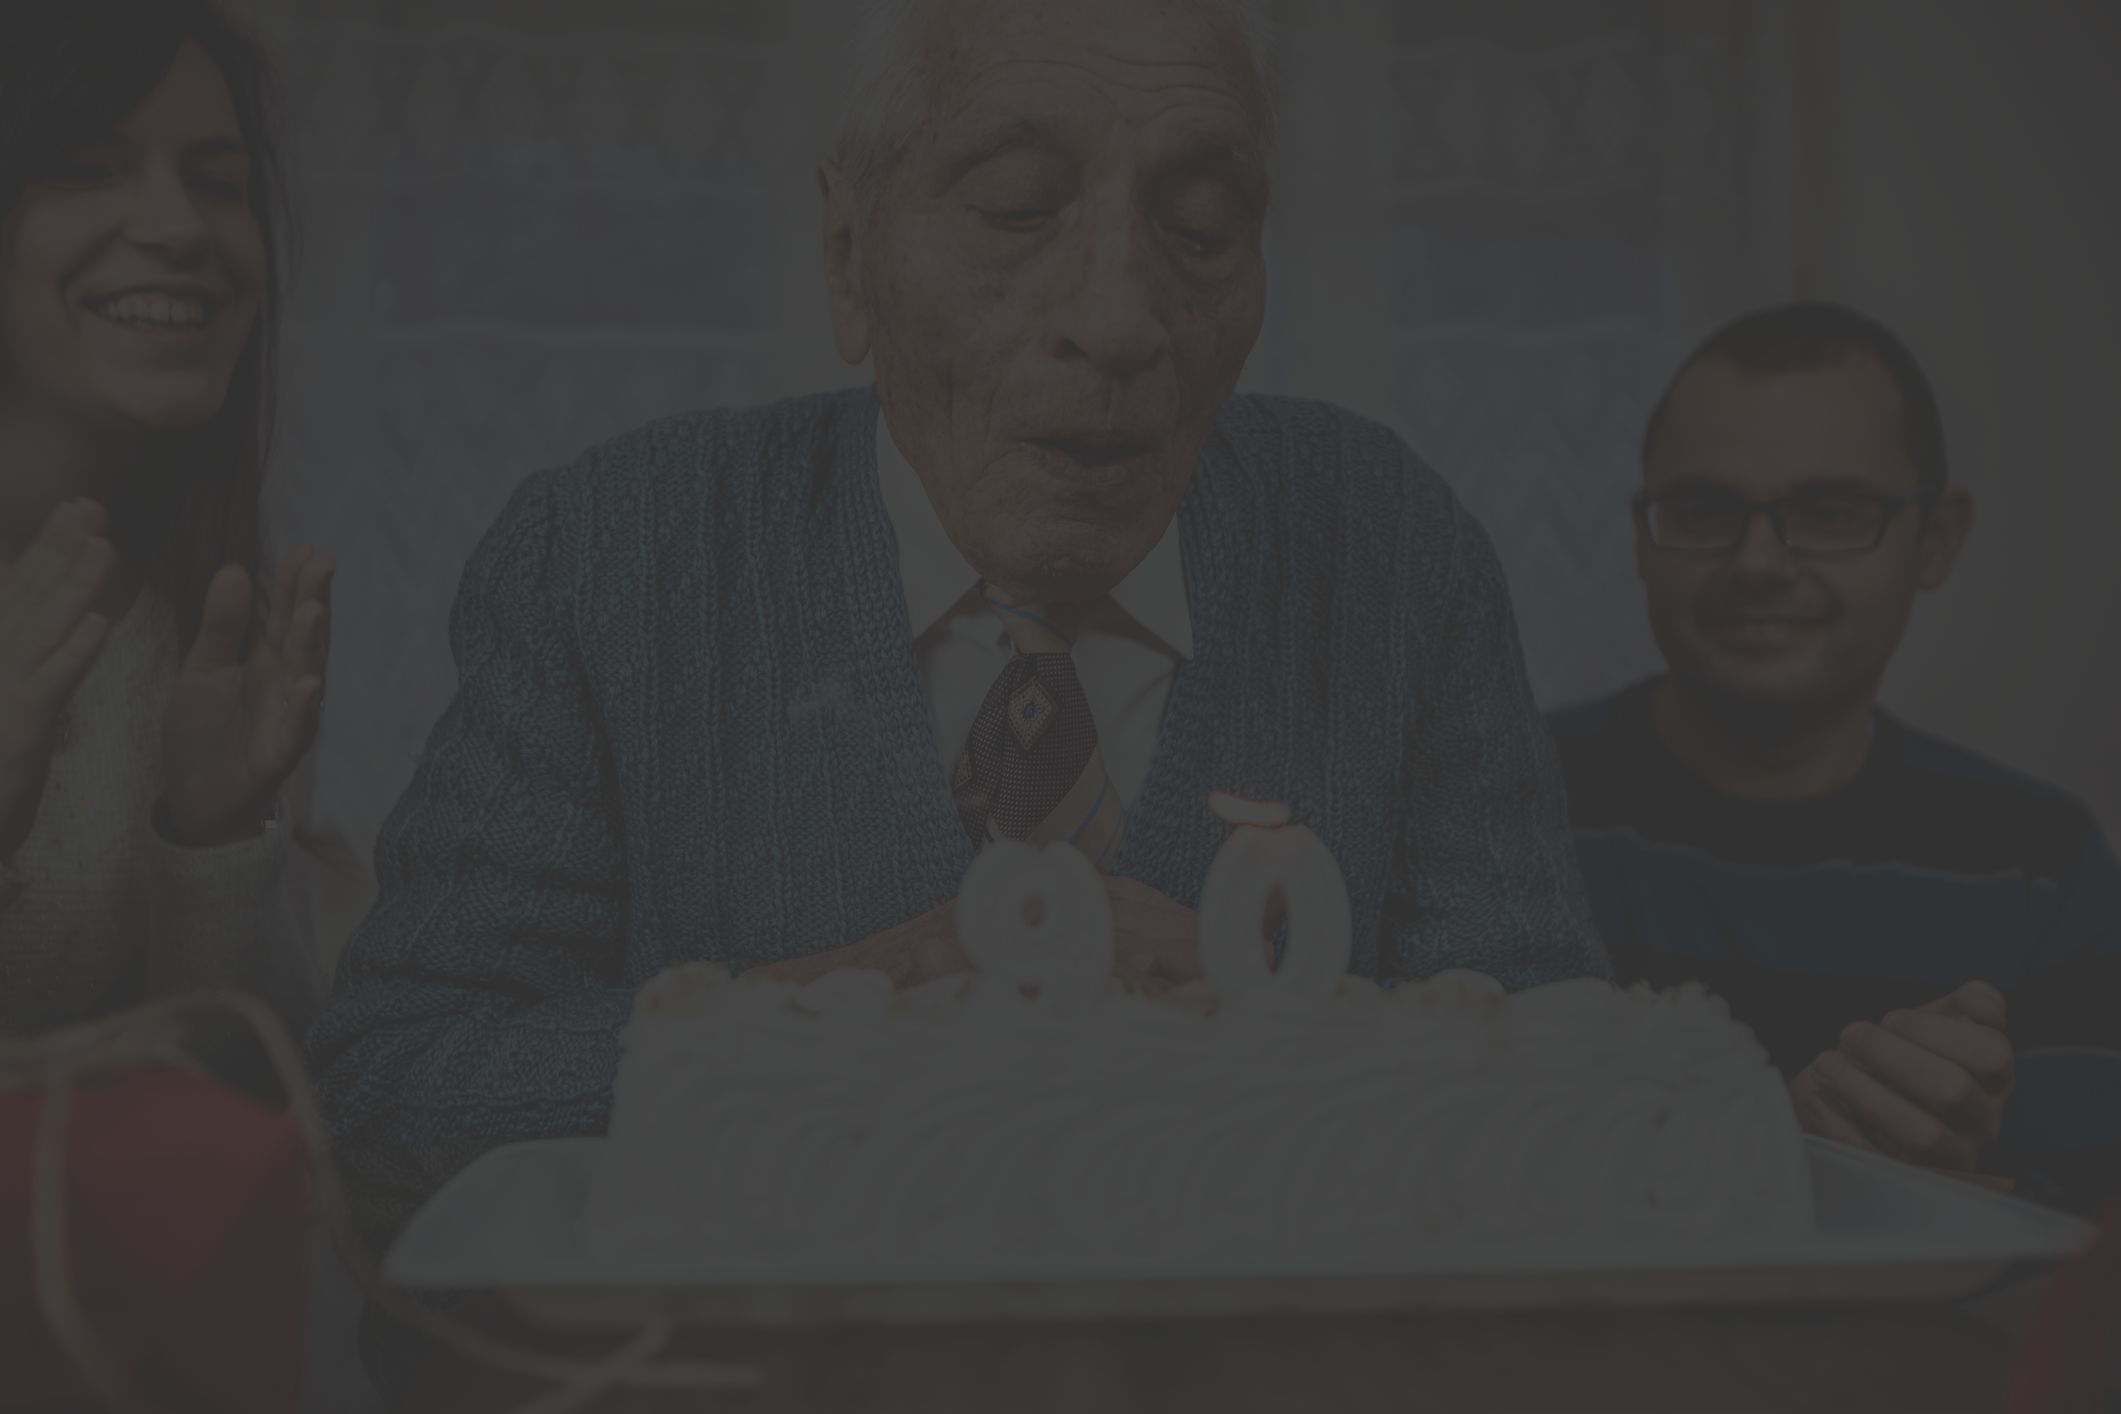 an older white man celebrates his 90th birthday with loved ones; he sits in front of a birthday cake and blows out the candles